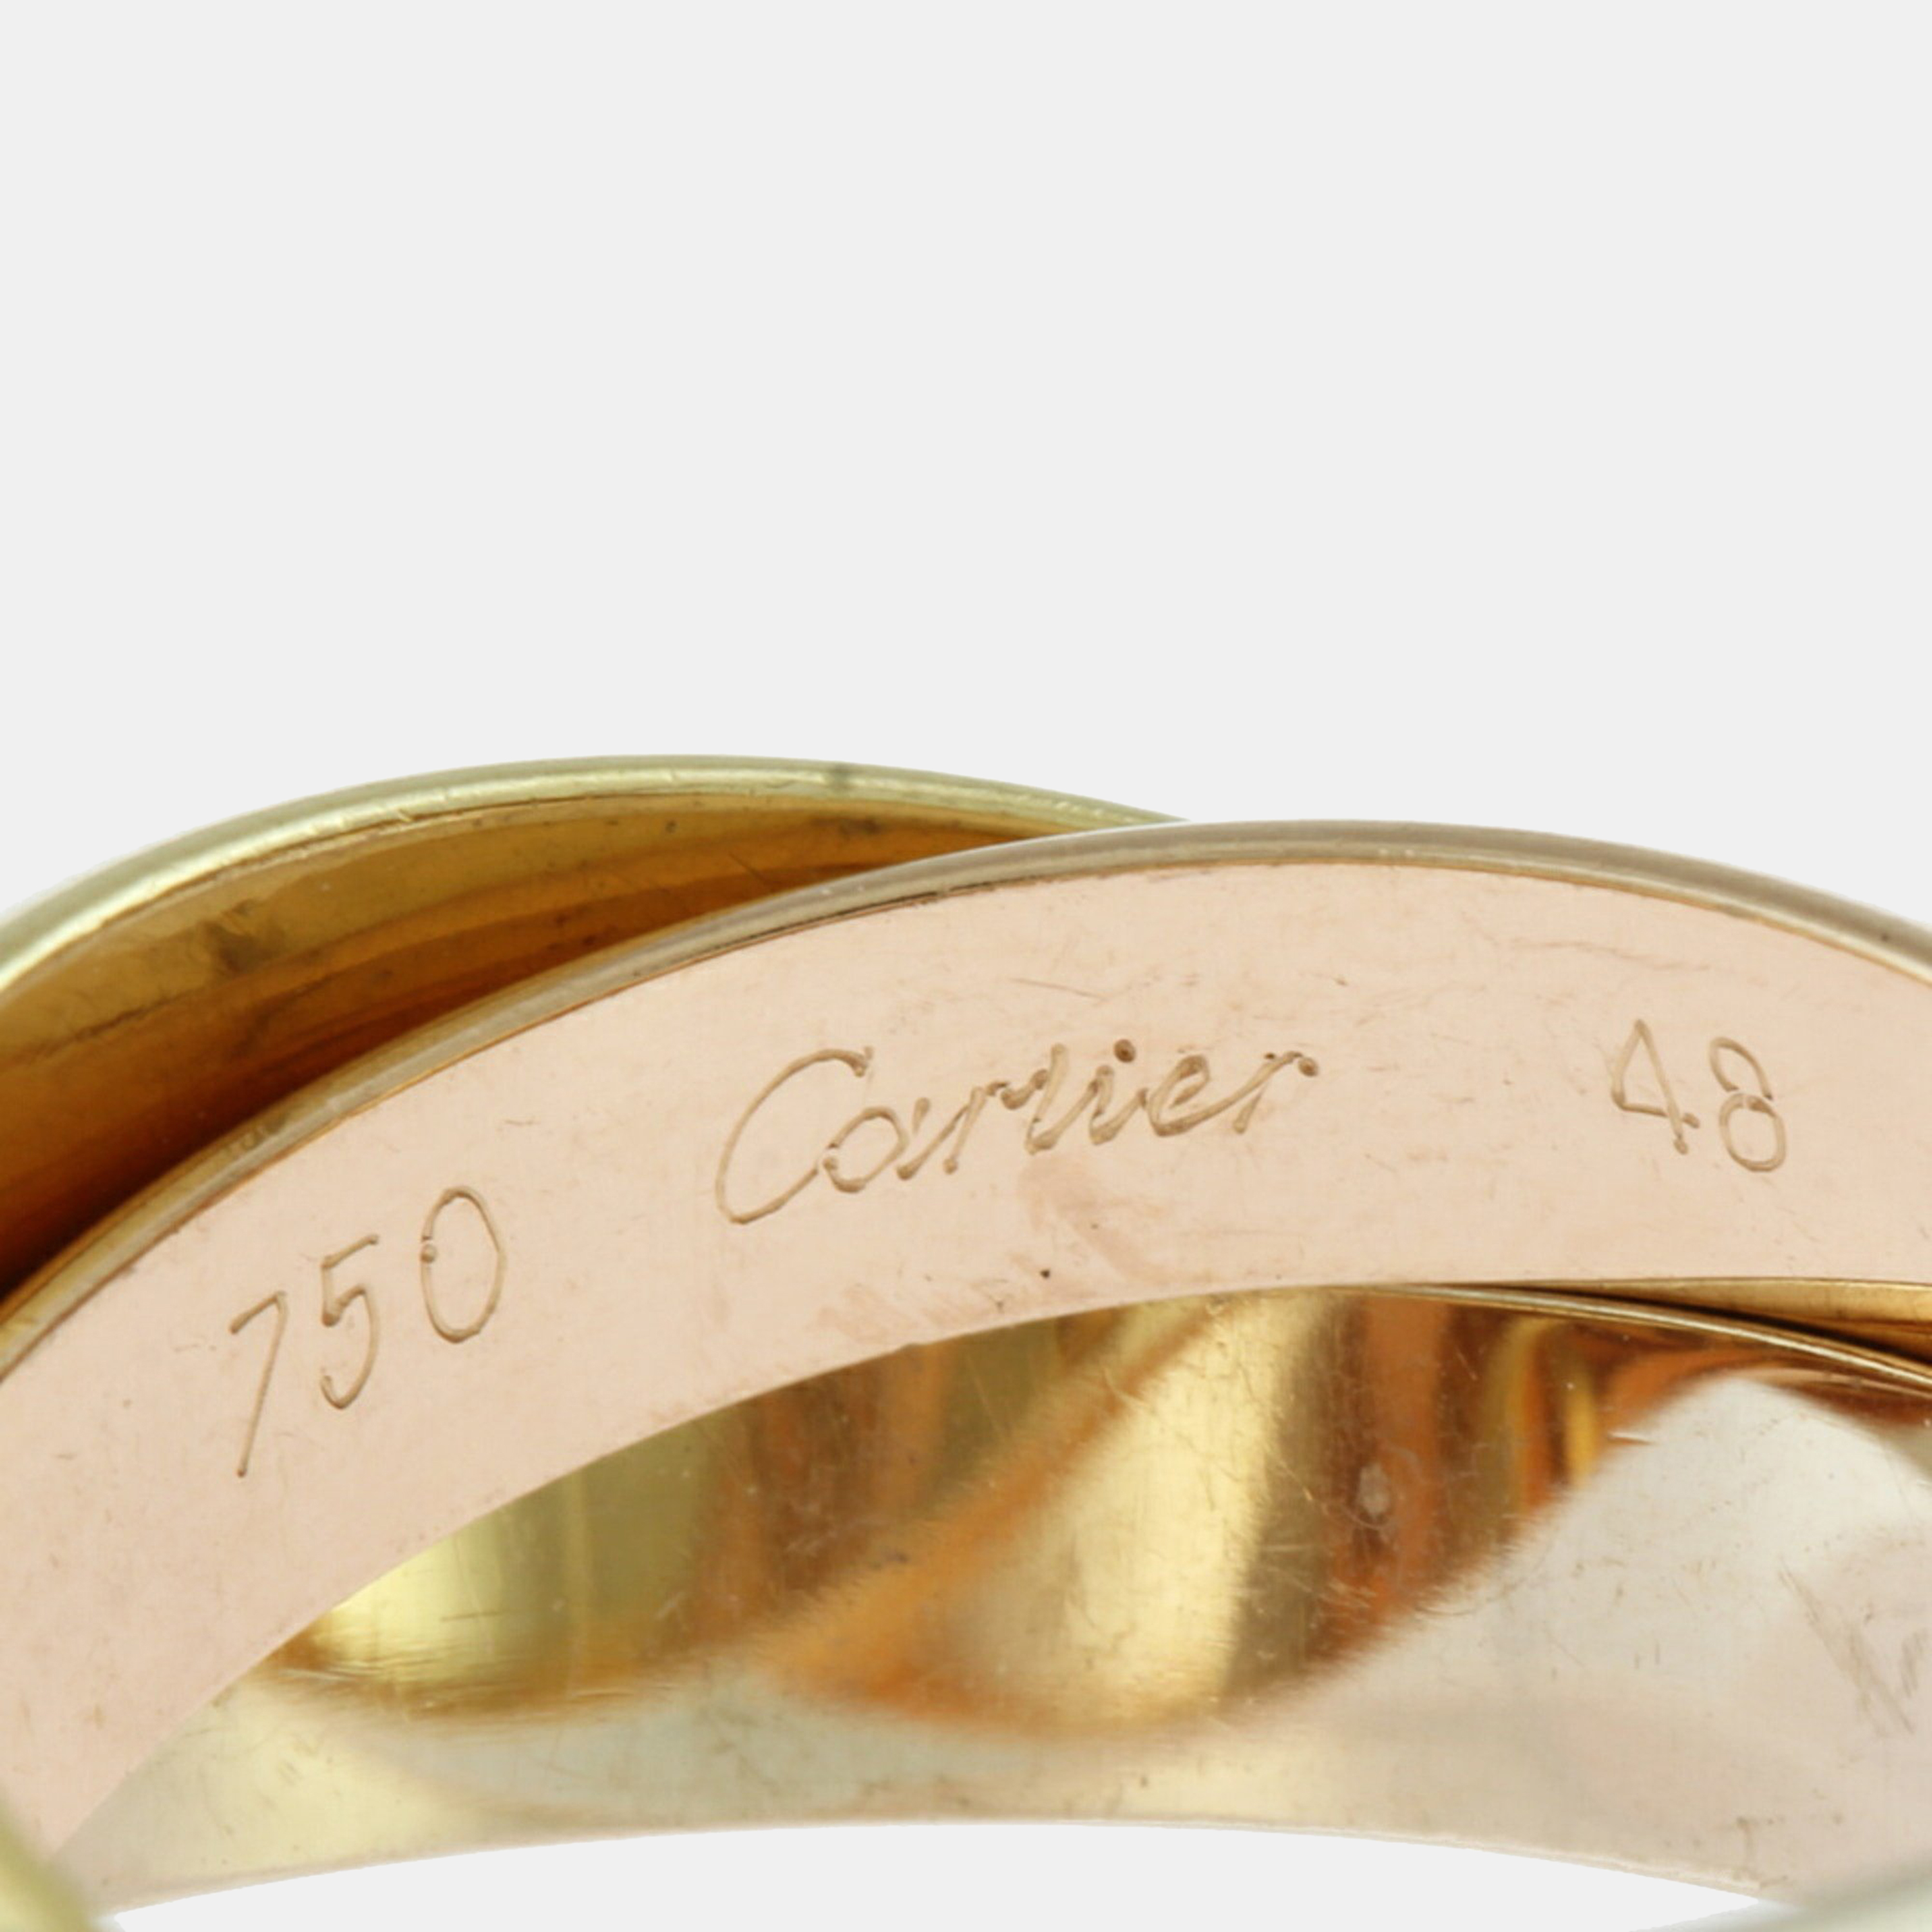 Cartier 18K Yellow, Rose And White Gold Trinity Band Ring EU 48